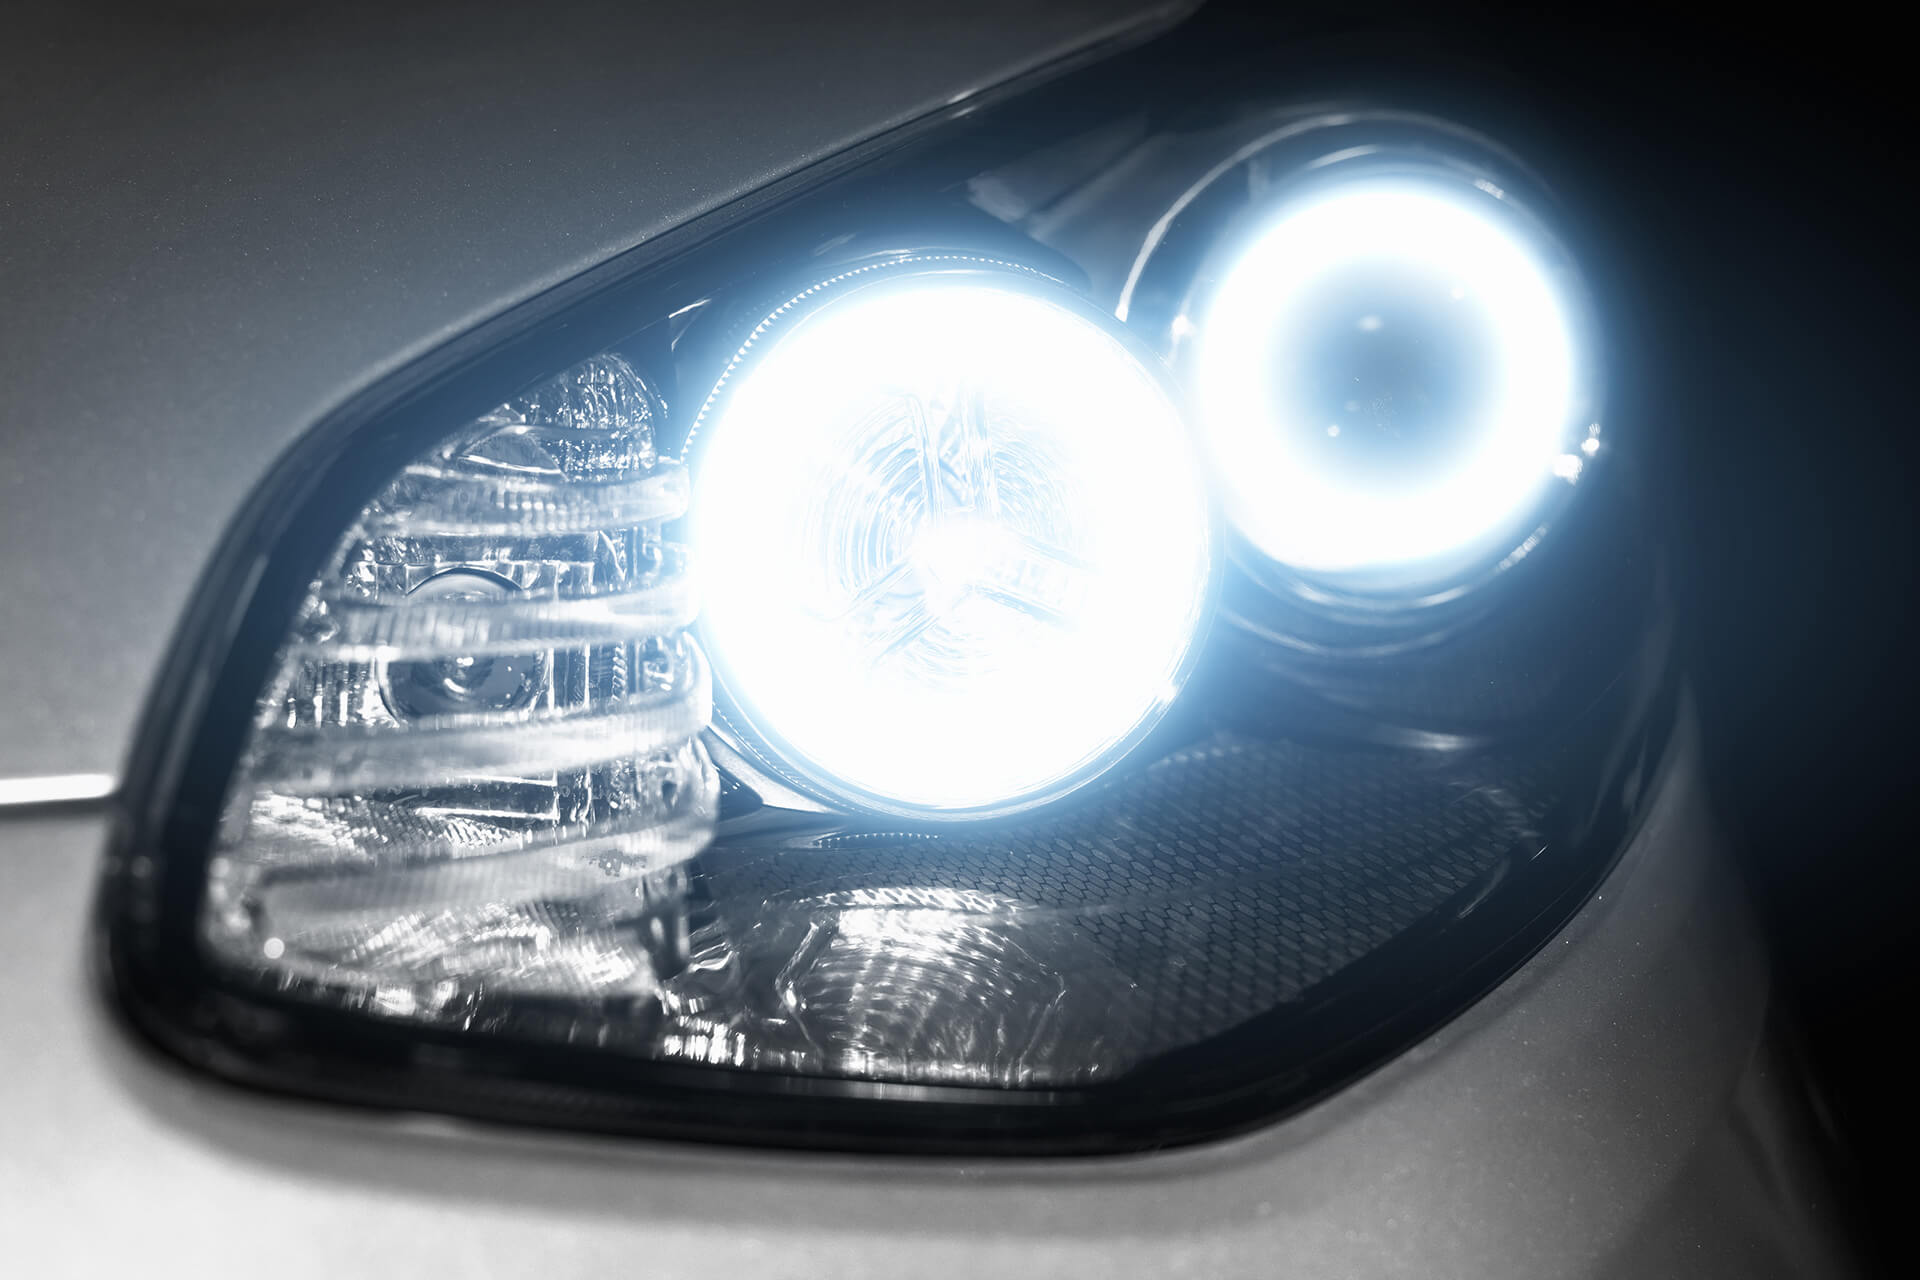 An of the differences between halogen, xenon and LED car lights